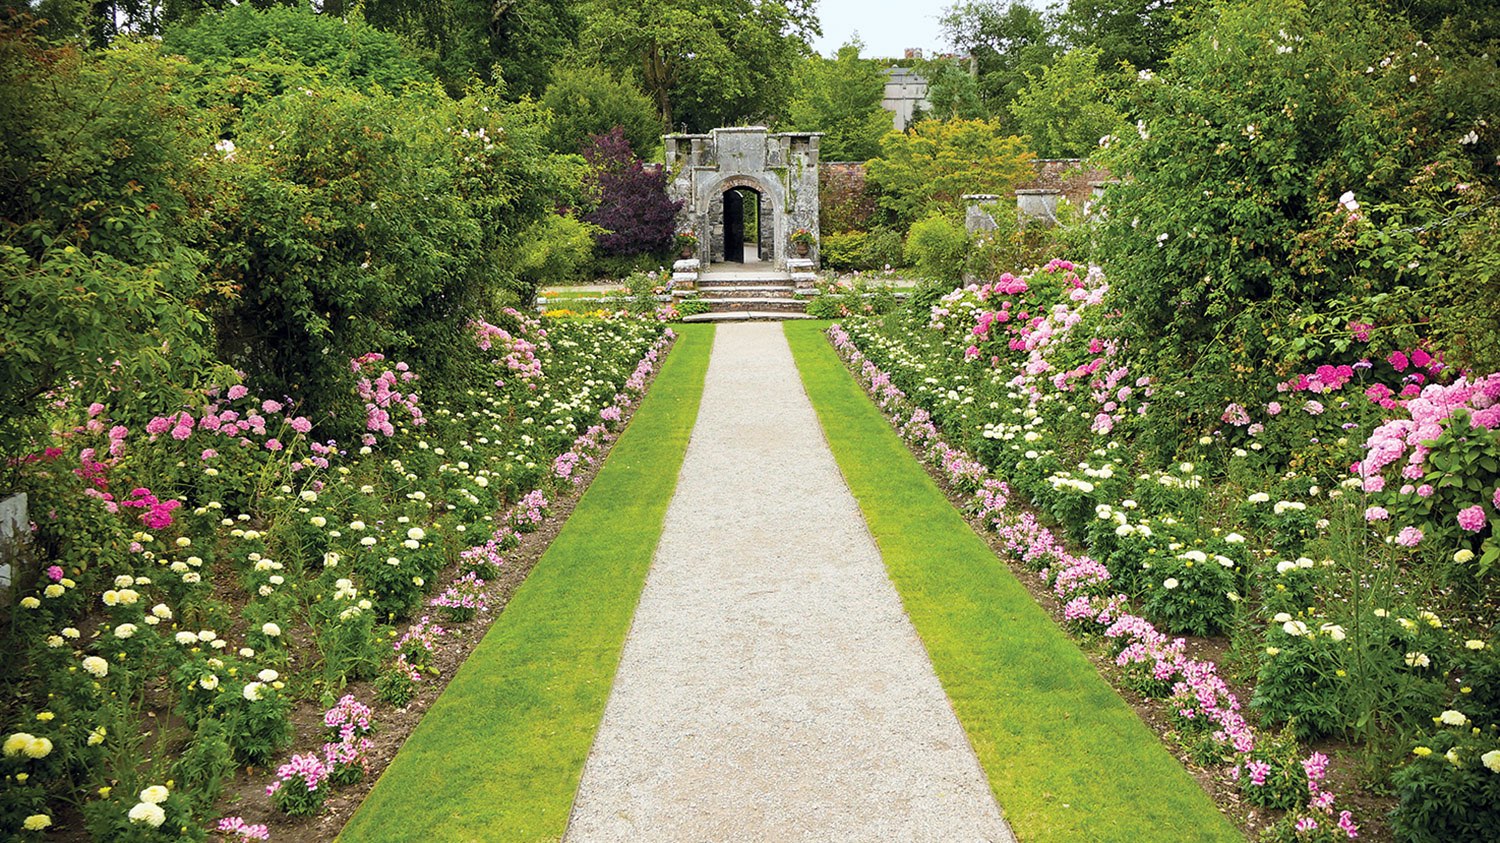 Photo of a narrow, straight gravel path leading to the garden wall. The path is lined on either side by a strip of grass, a row of low-growing pink flowers, a row of white roses, a row of taller light pink and hot pink roses, and finally a row of various taller shrubs, some flowering.